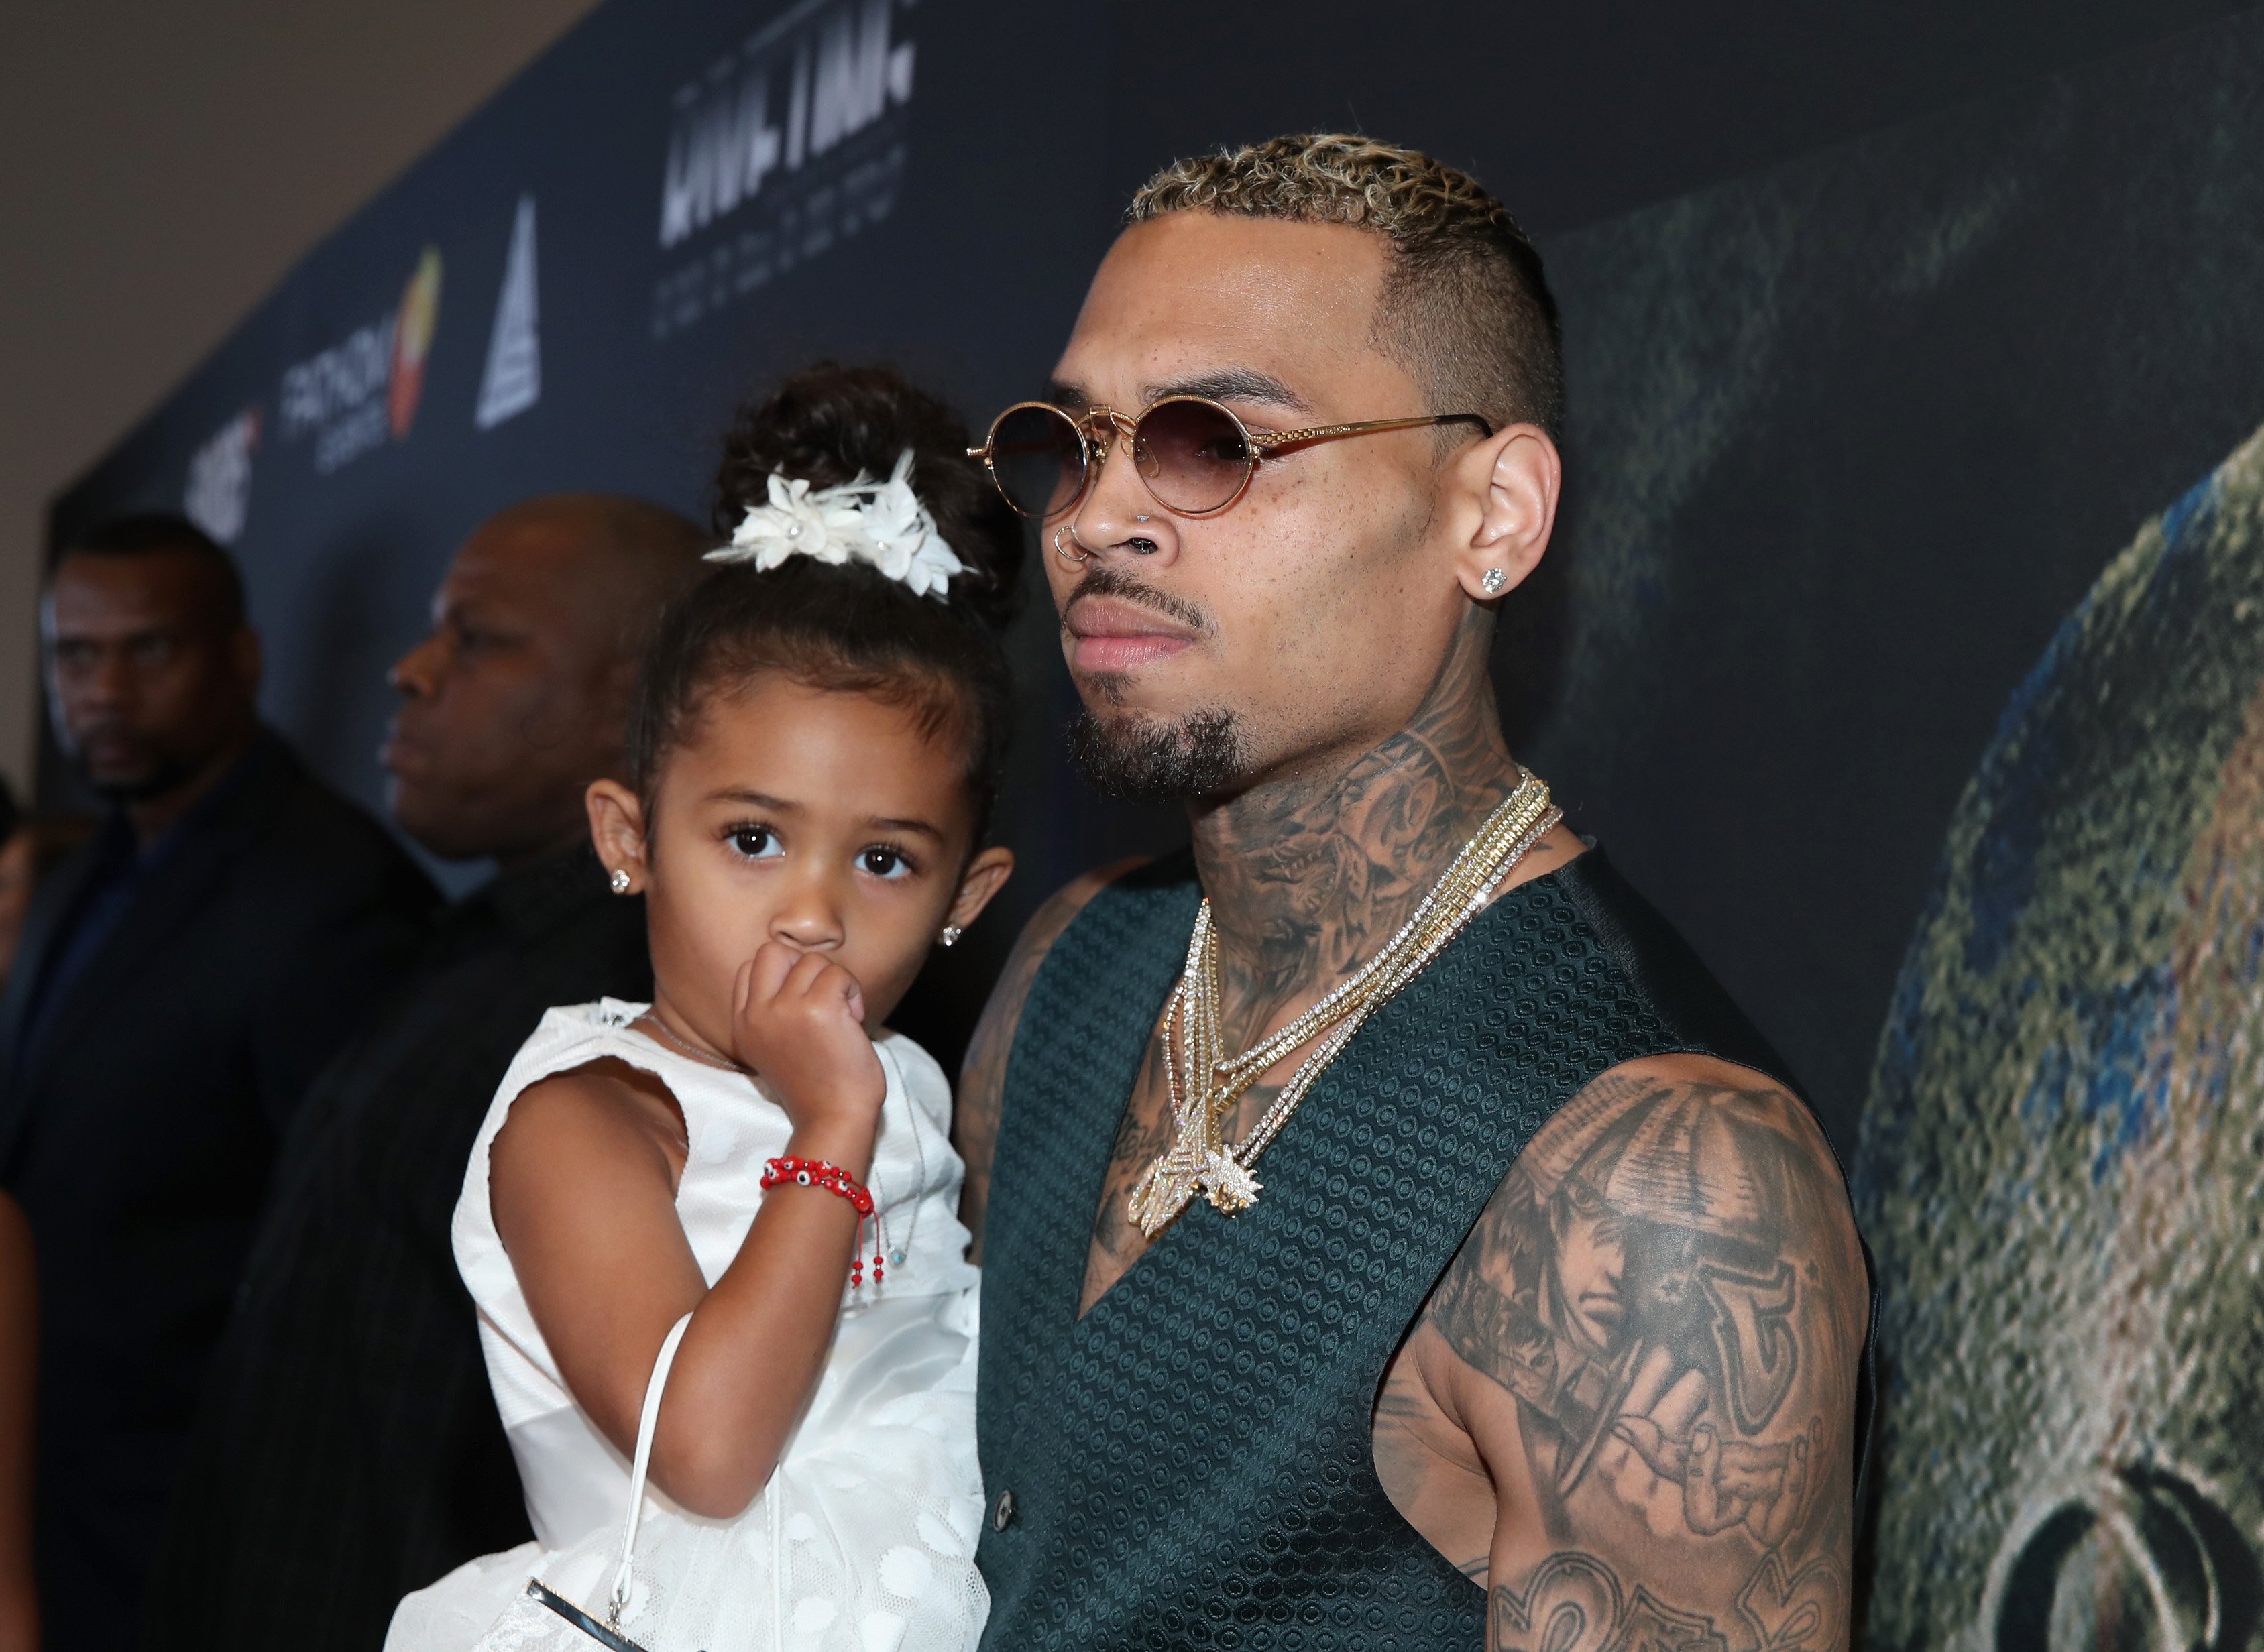 Chris Brown & Royalty at the Premiere Of "Chris Brown: Welcome To My Life" on June 6, 2017 | Photo: Getty Images